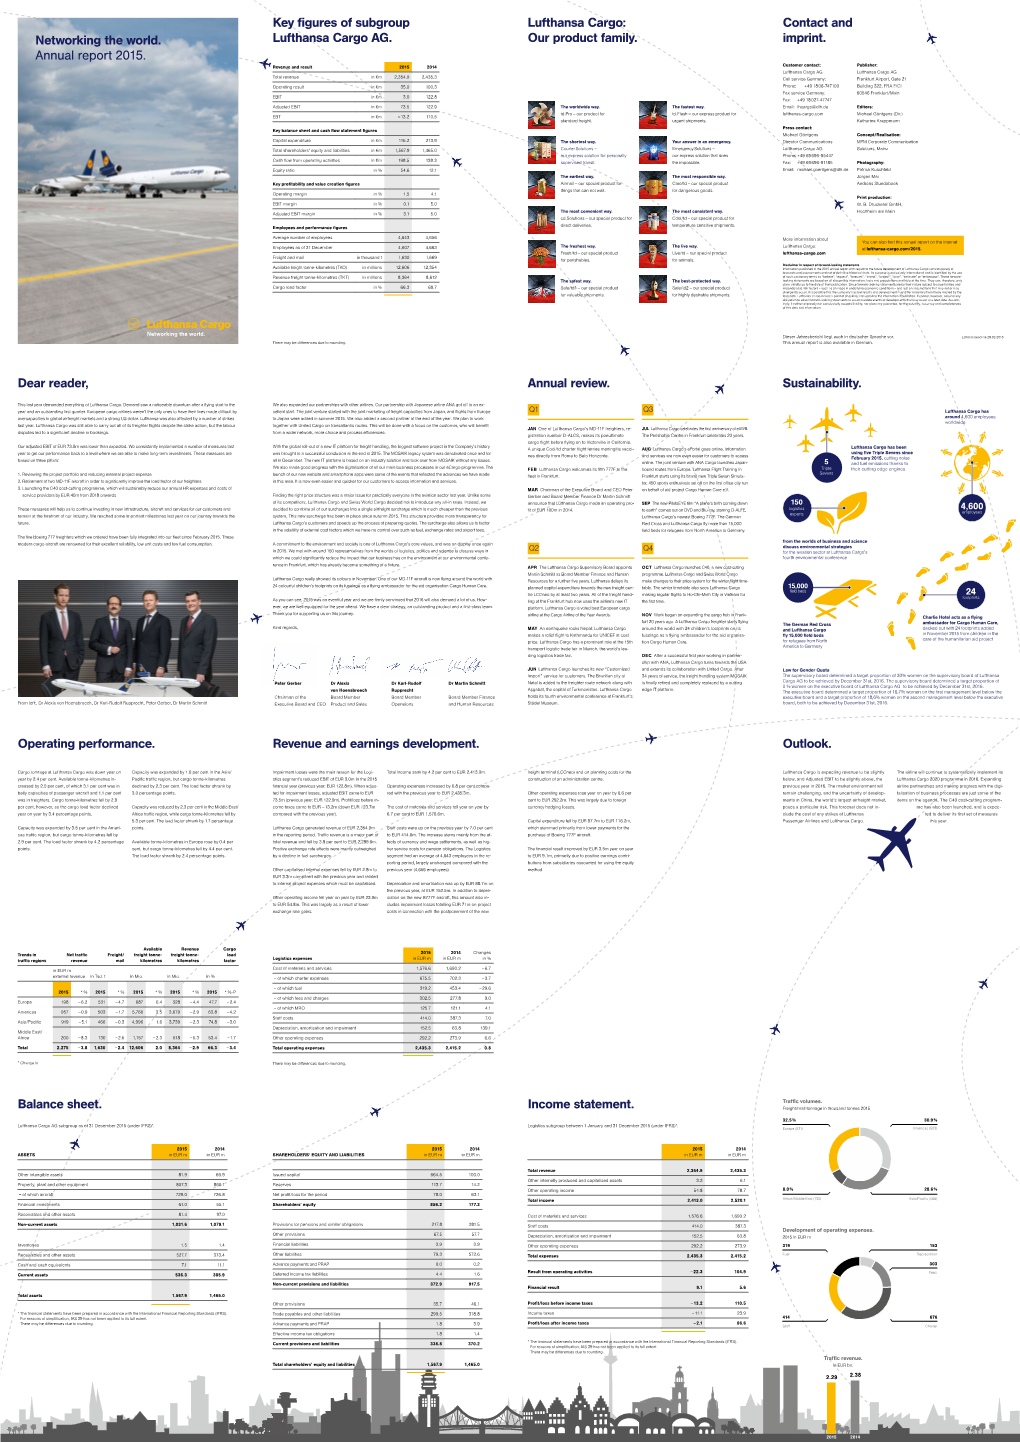 Networking the World. Annual Report 2015